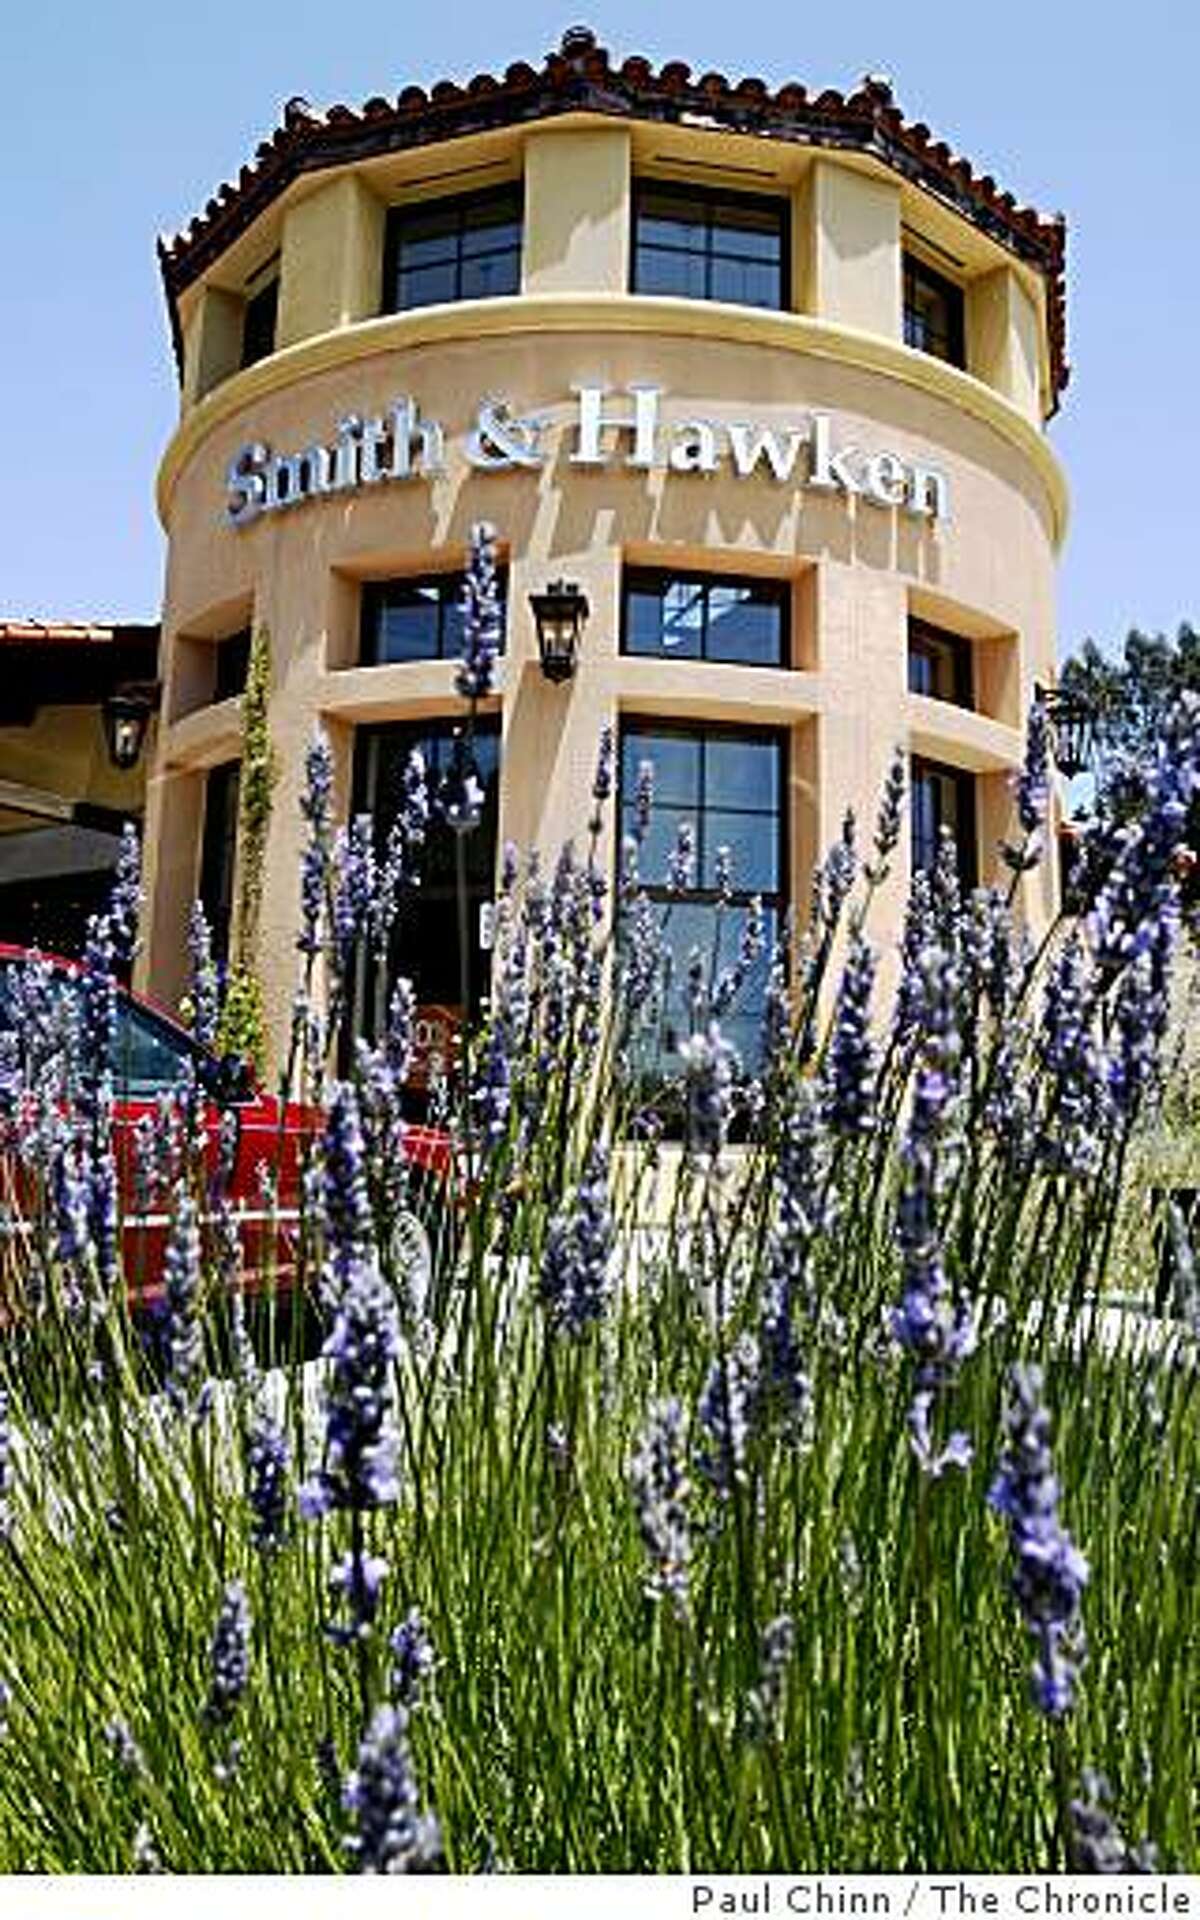 The Smith & Hawken store at the Strawberry Village shopping center is seen in Mill Valley, Calif., on Thursday, July 9, 2009. The parent company of the high-end retailer that sells garden merchandise and outdoor furniture announced that it will close 56 stores nationwide by the end of the year.